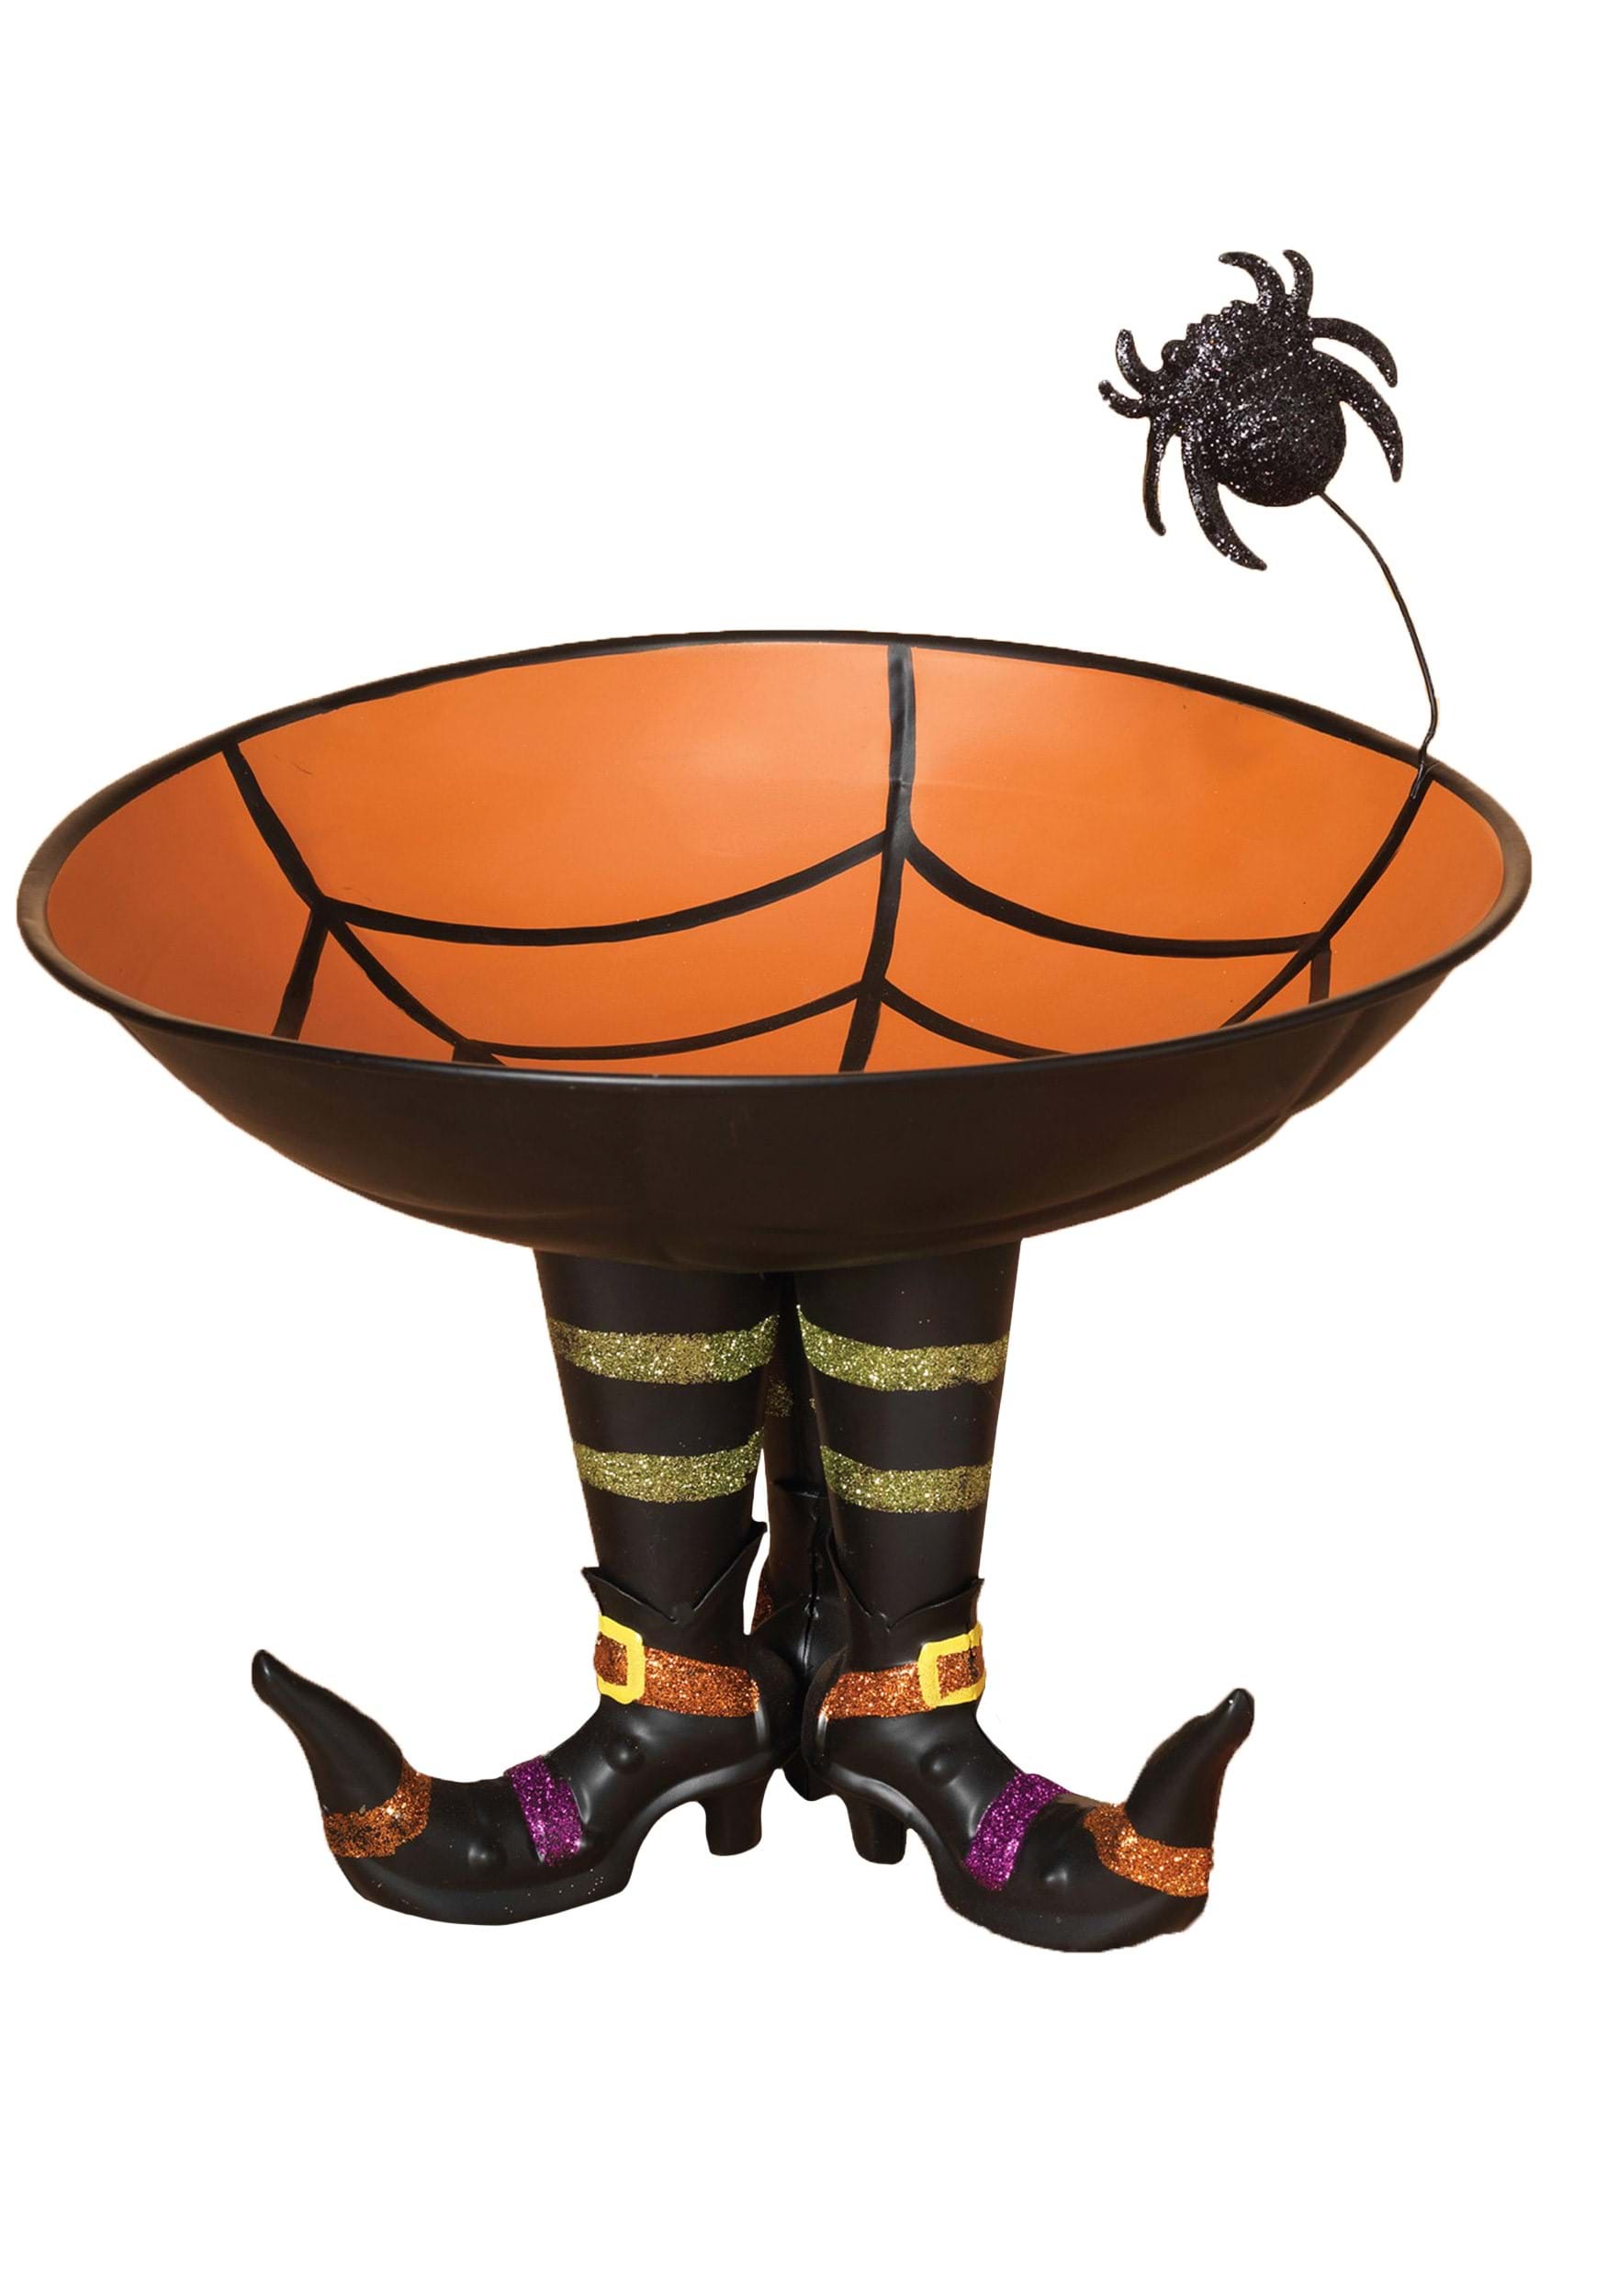 11″ Metal Candy Bowl on Witch Boots with Spider Decoration